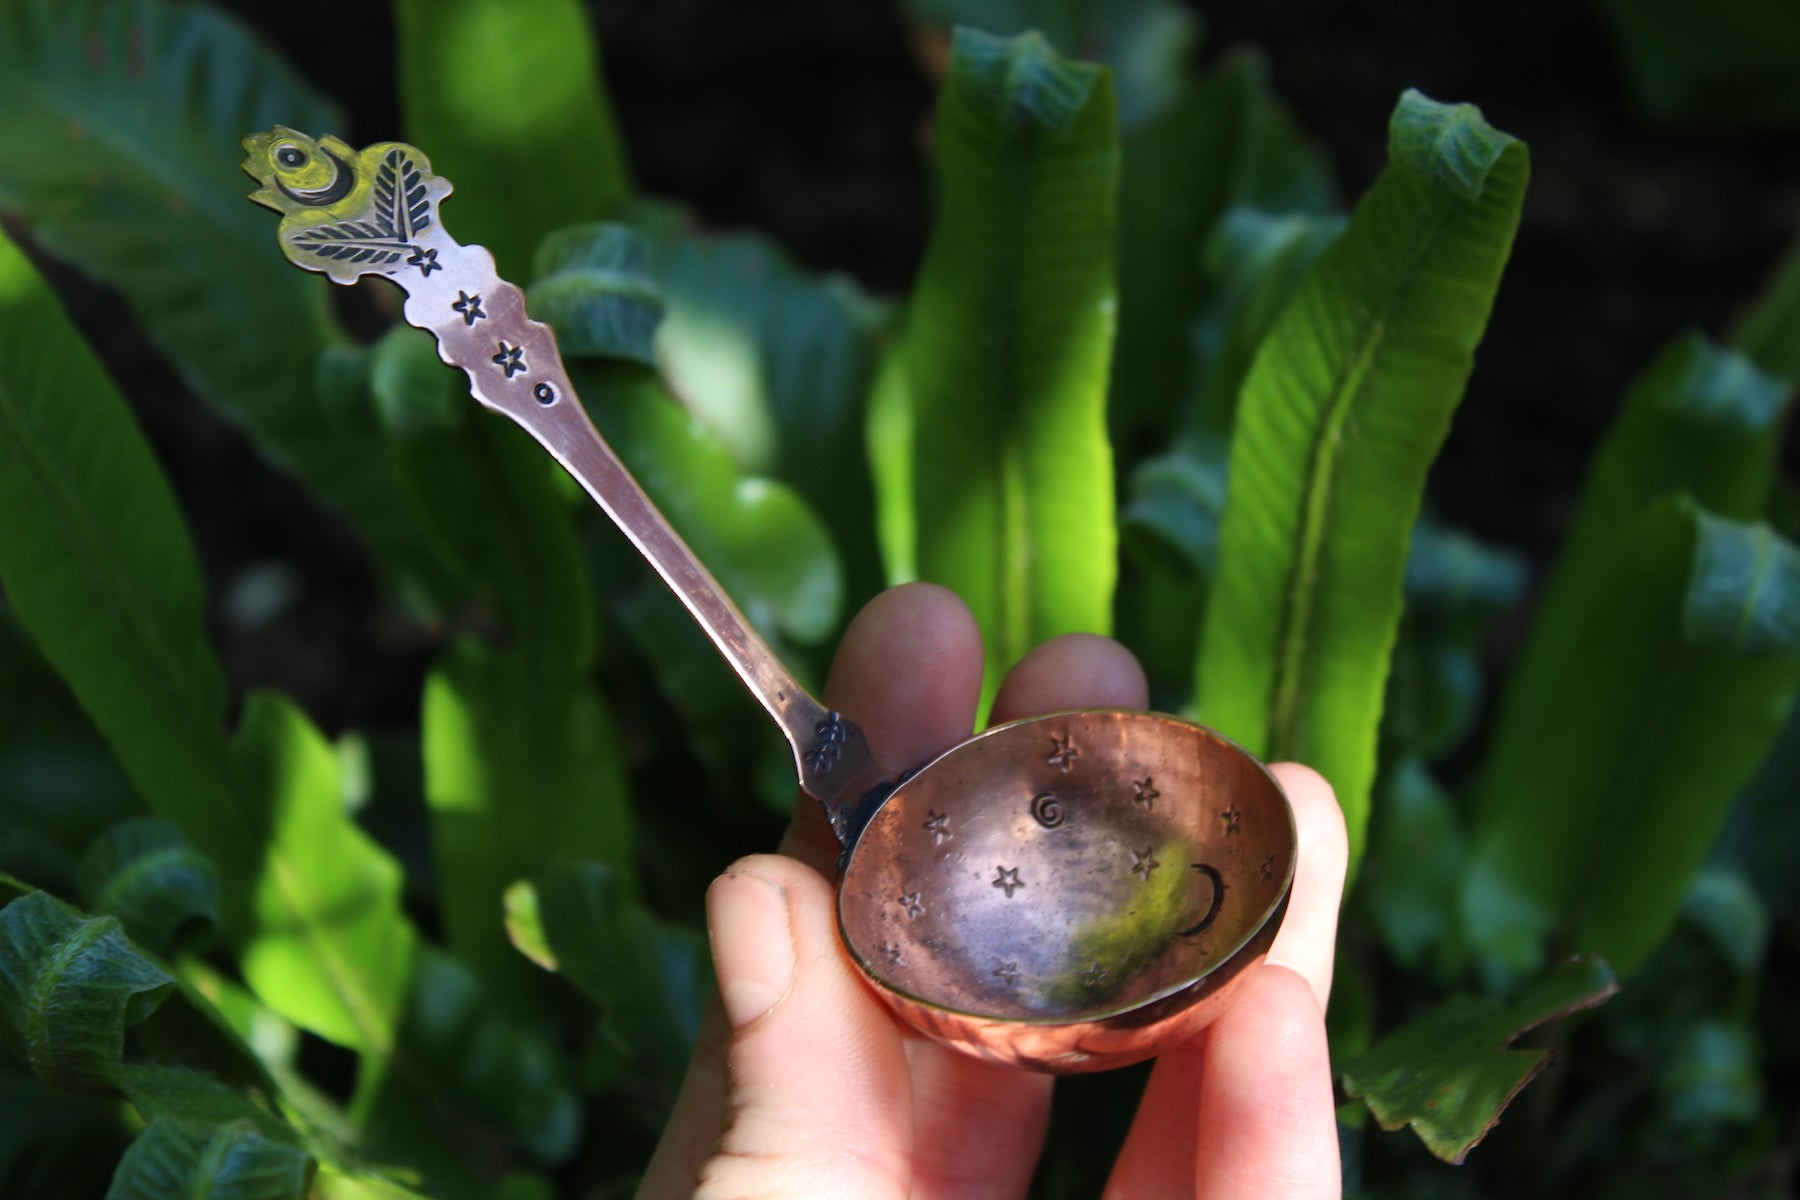 WITCHES SPOON No. 1 - Handmade Copper Spoon